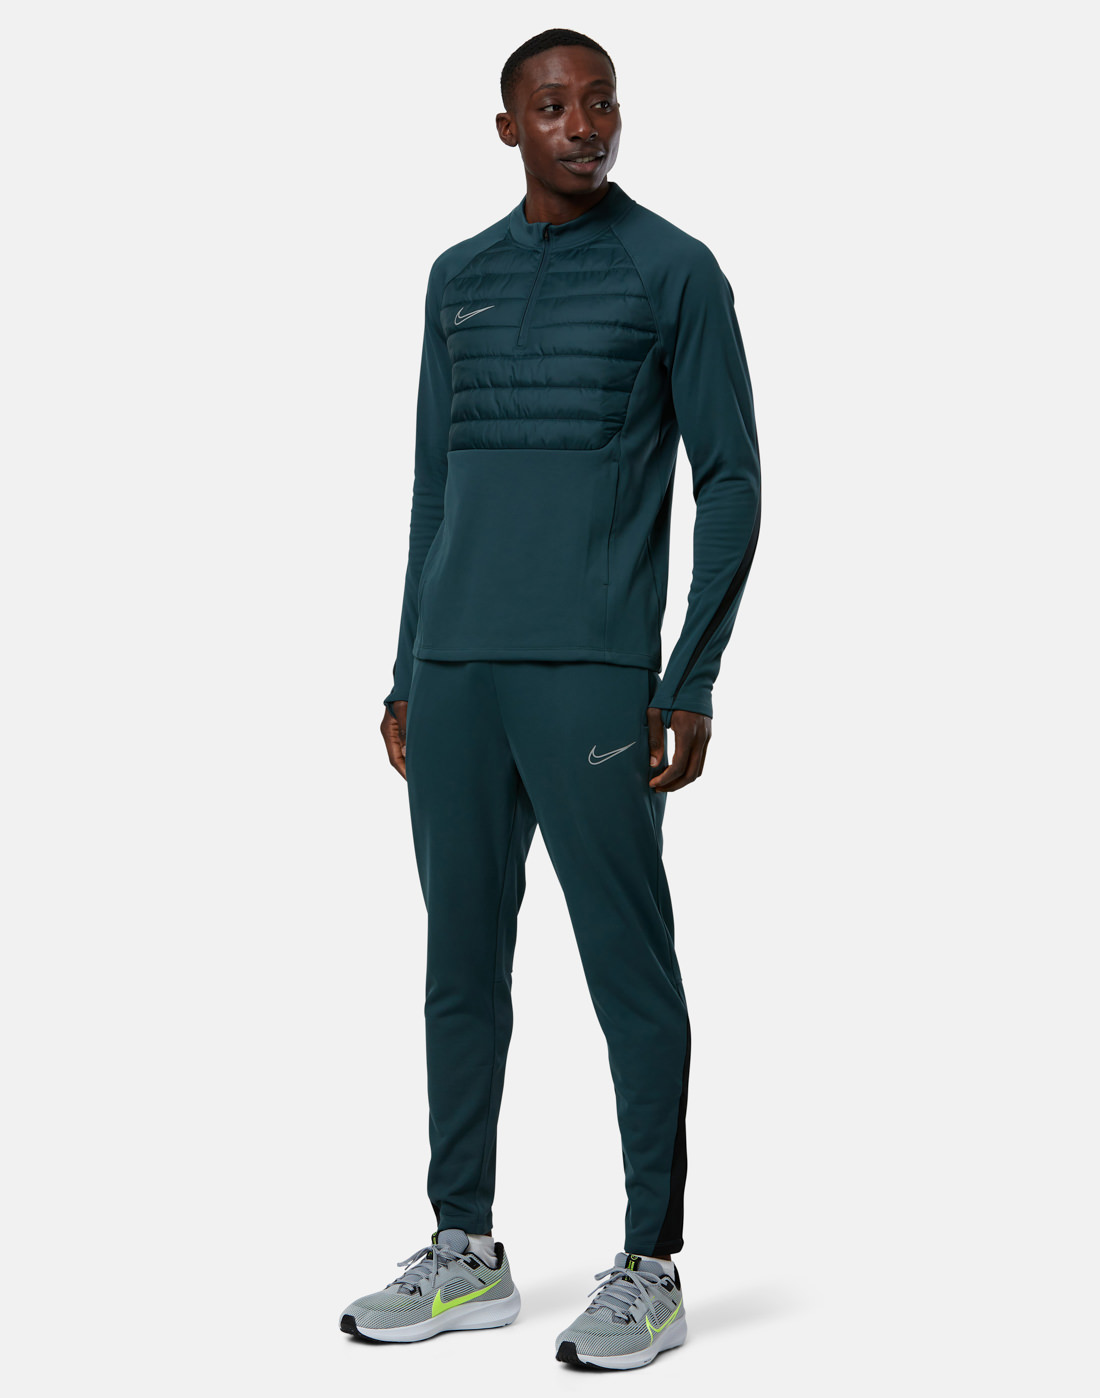 Nike Mens Winter Warrior Academy Pant - Green | Life Style Sports IE